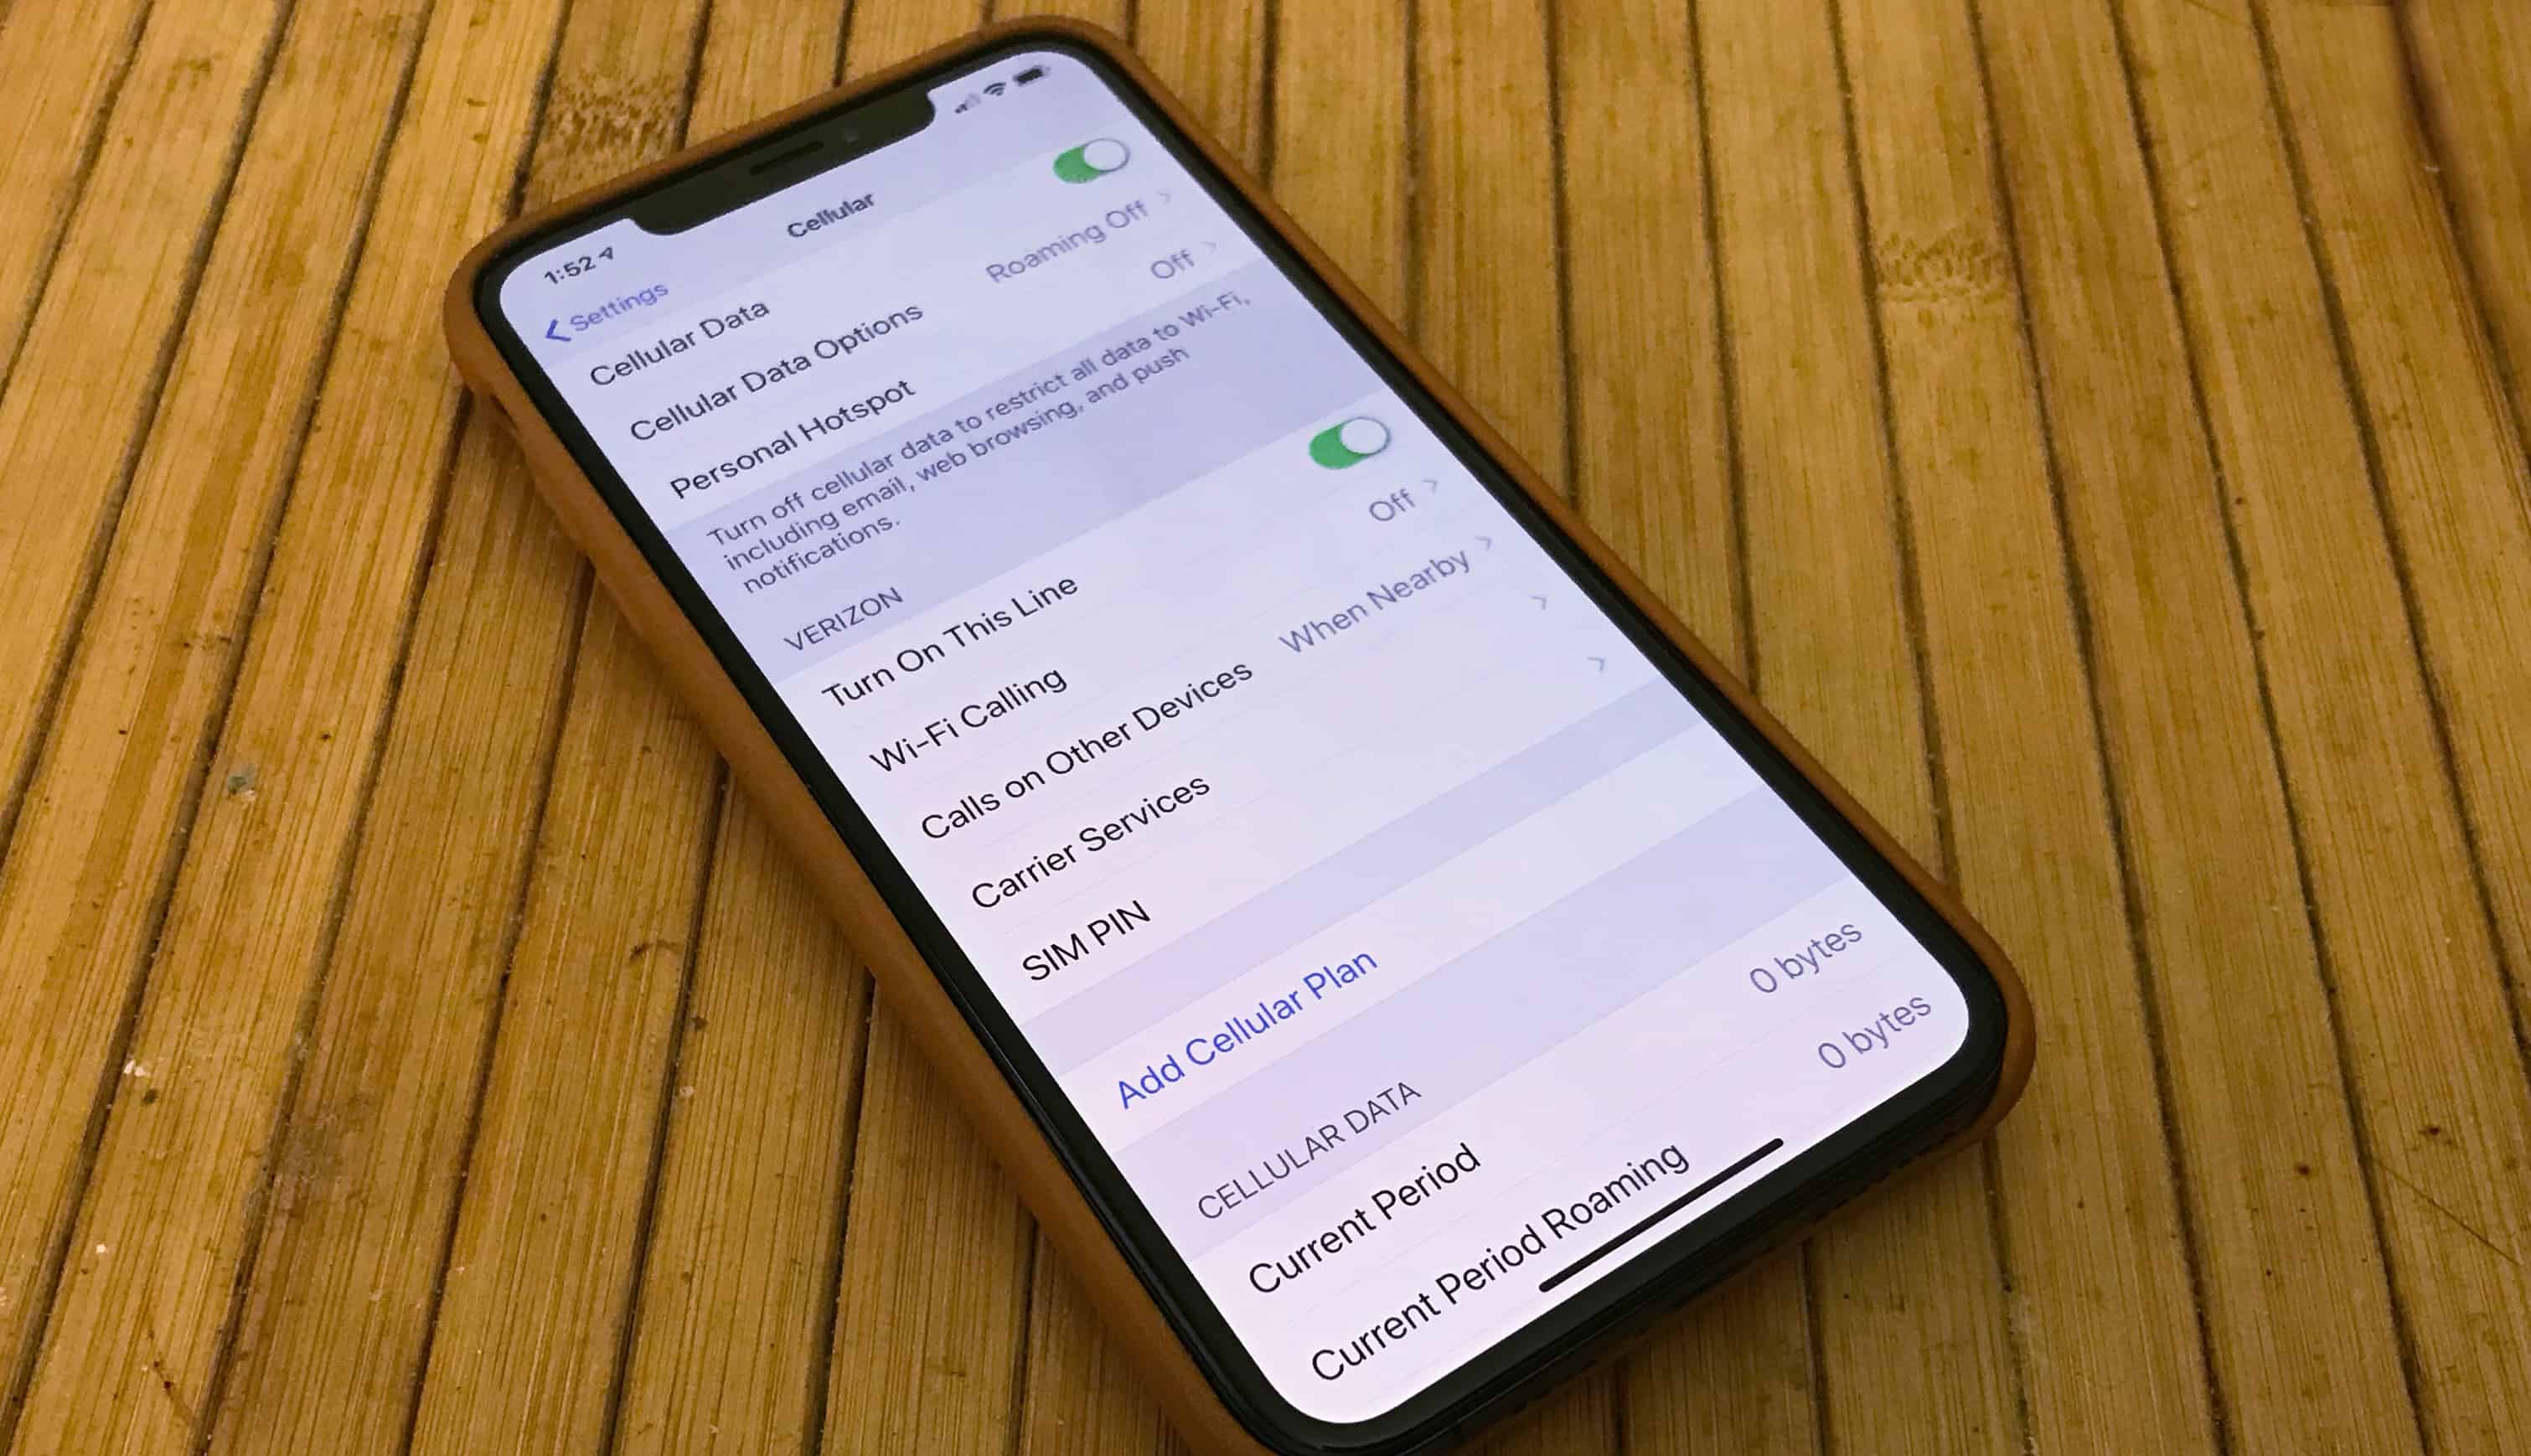 When iPhone Dual SIM support appears in iOS 12.1, it will be possible to use two service plans at once with Apple's latest models.